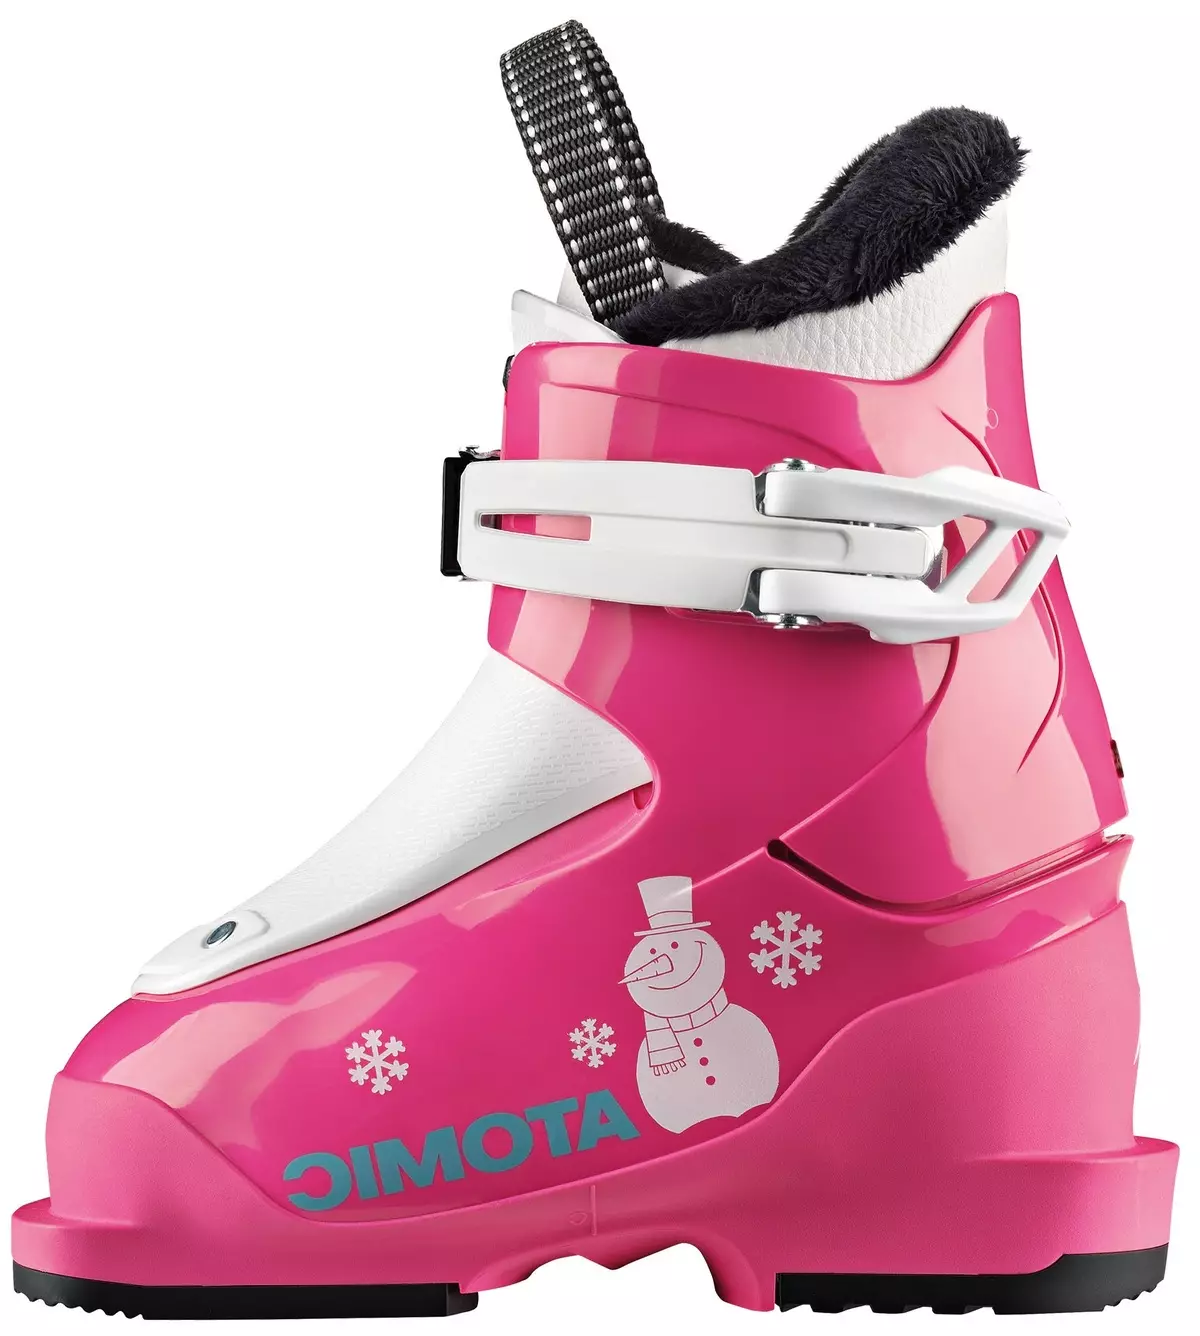 Children's ski boots: ski and other shoes and table of their size. How to choose ski boots for children? Models 28-33 and other sizes 1664_44